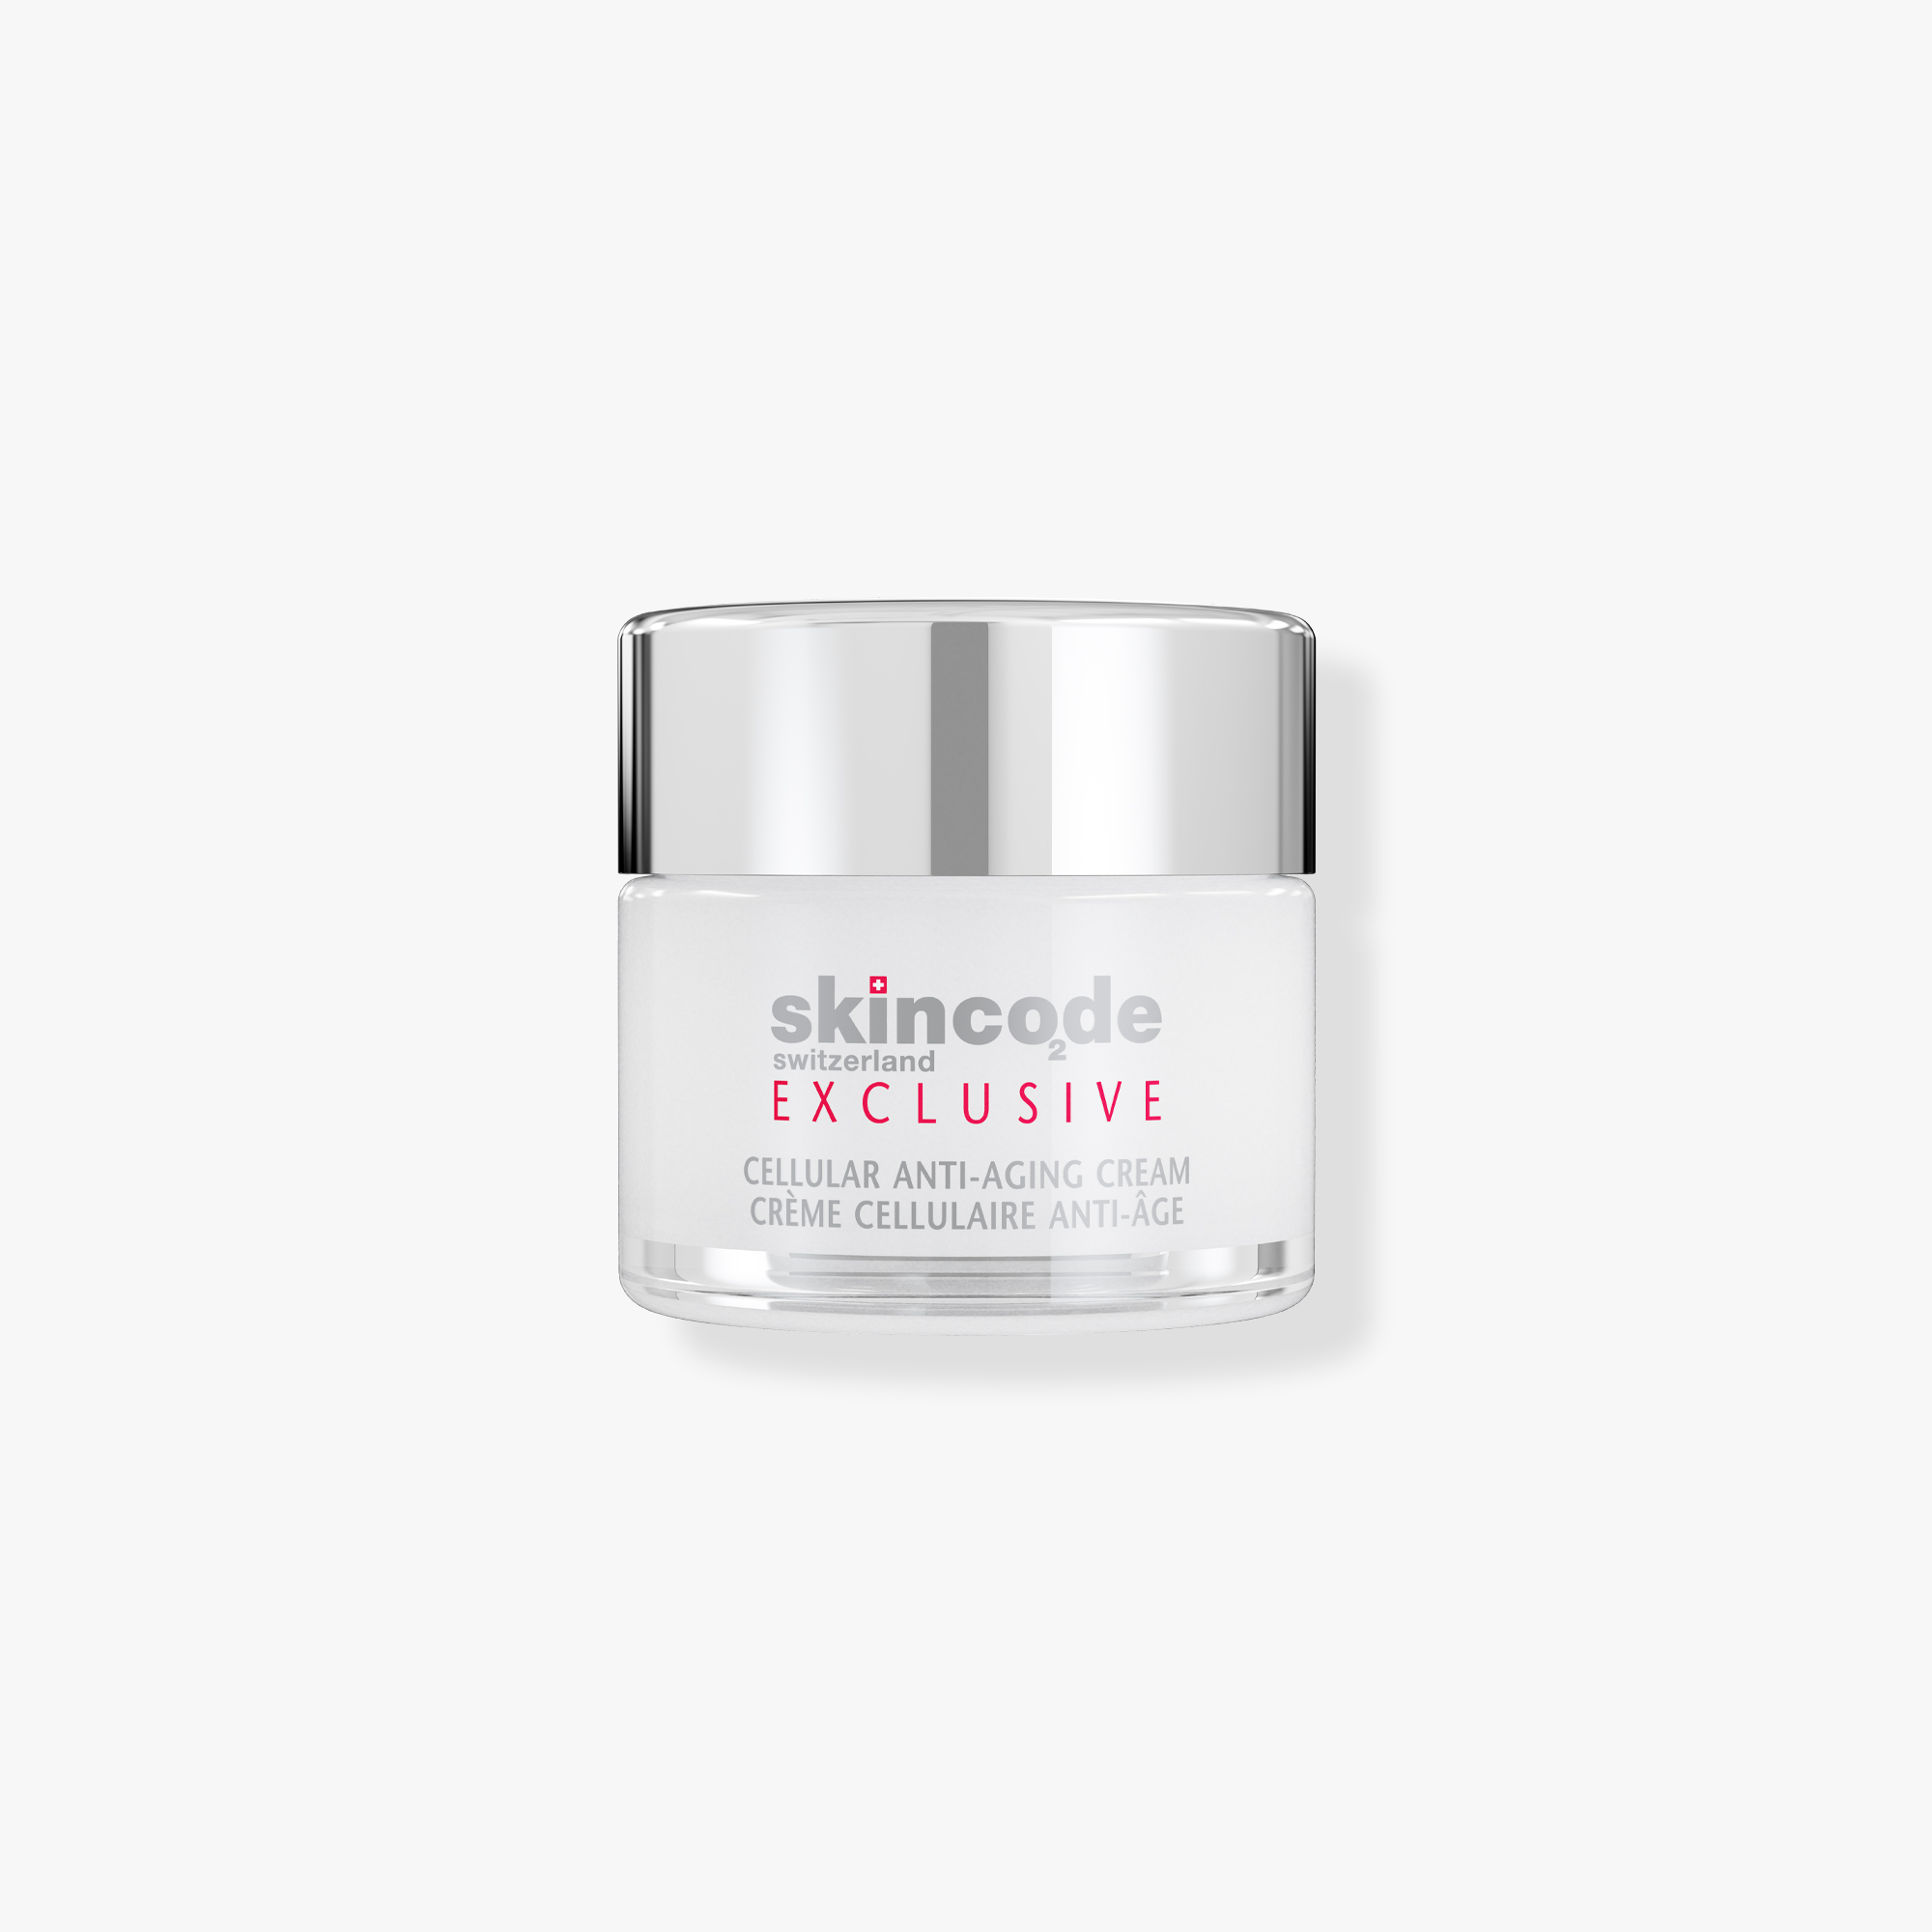 Skincode cellular anti-aging cream review